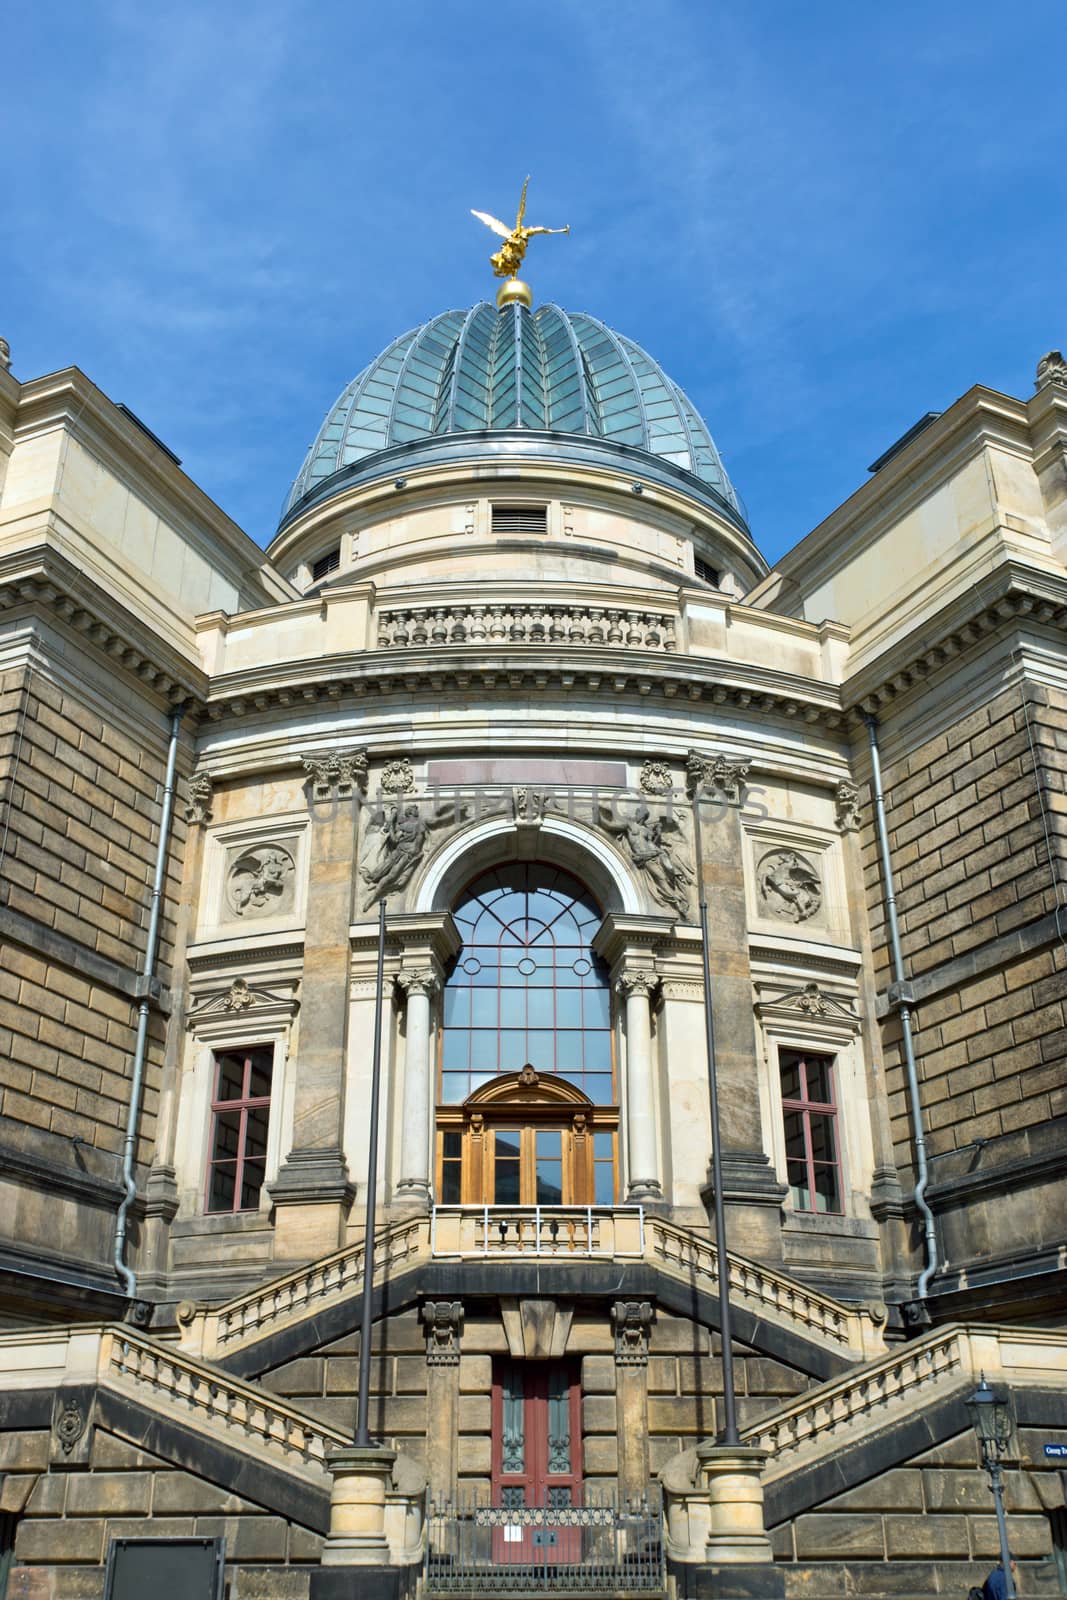 The Academy of Arts in Dresden, Germany